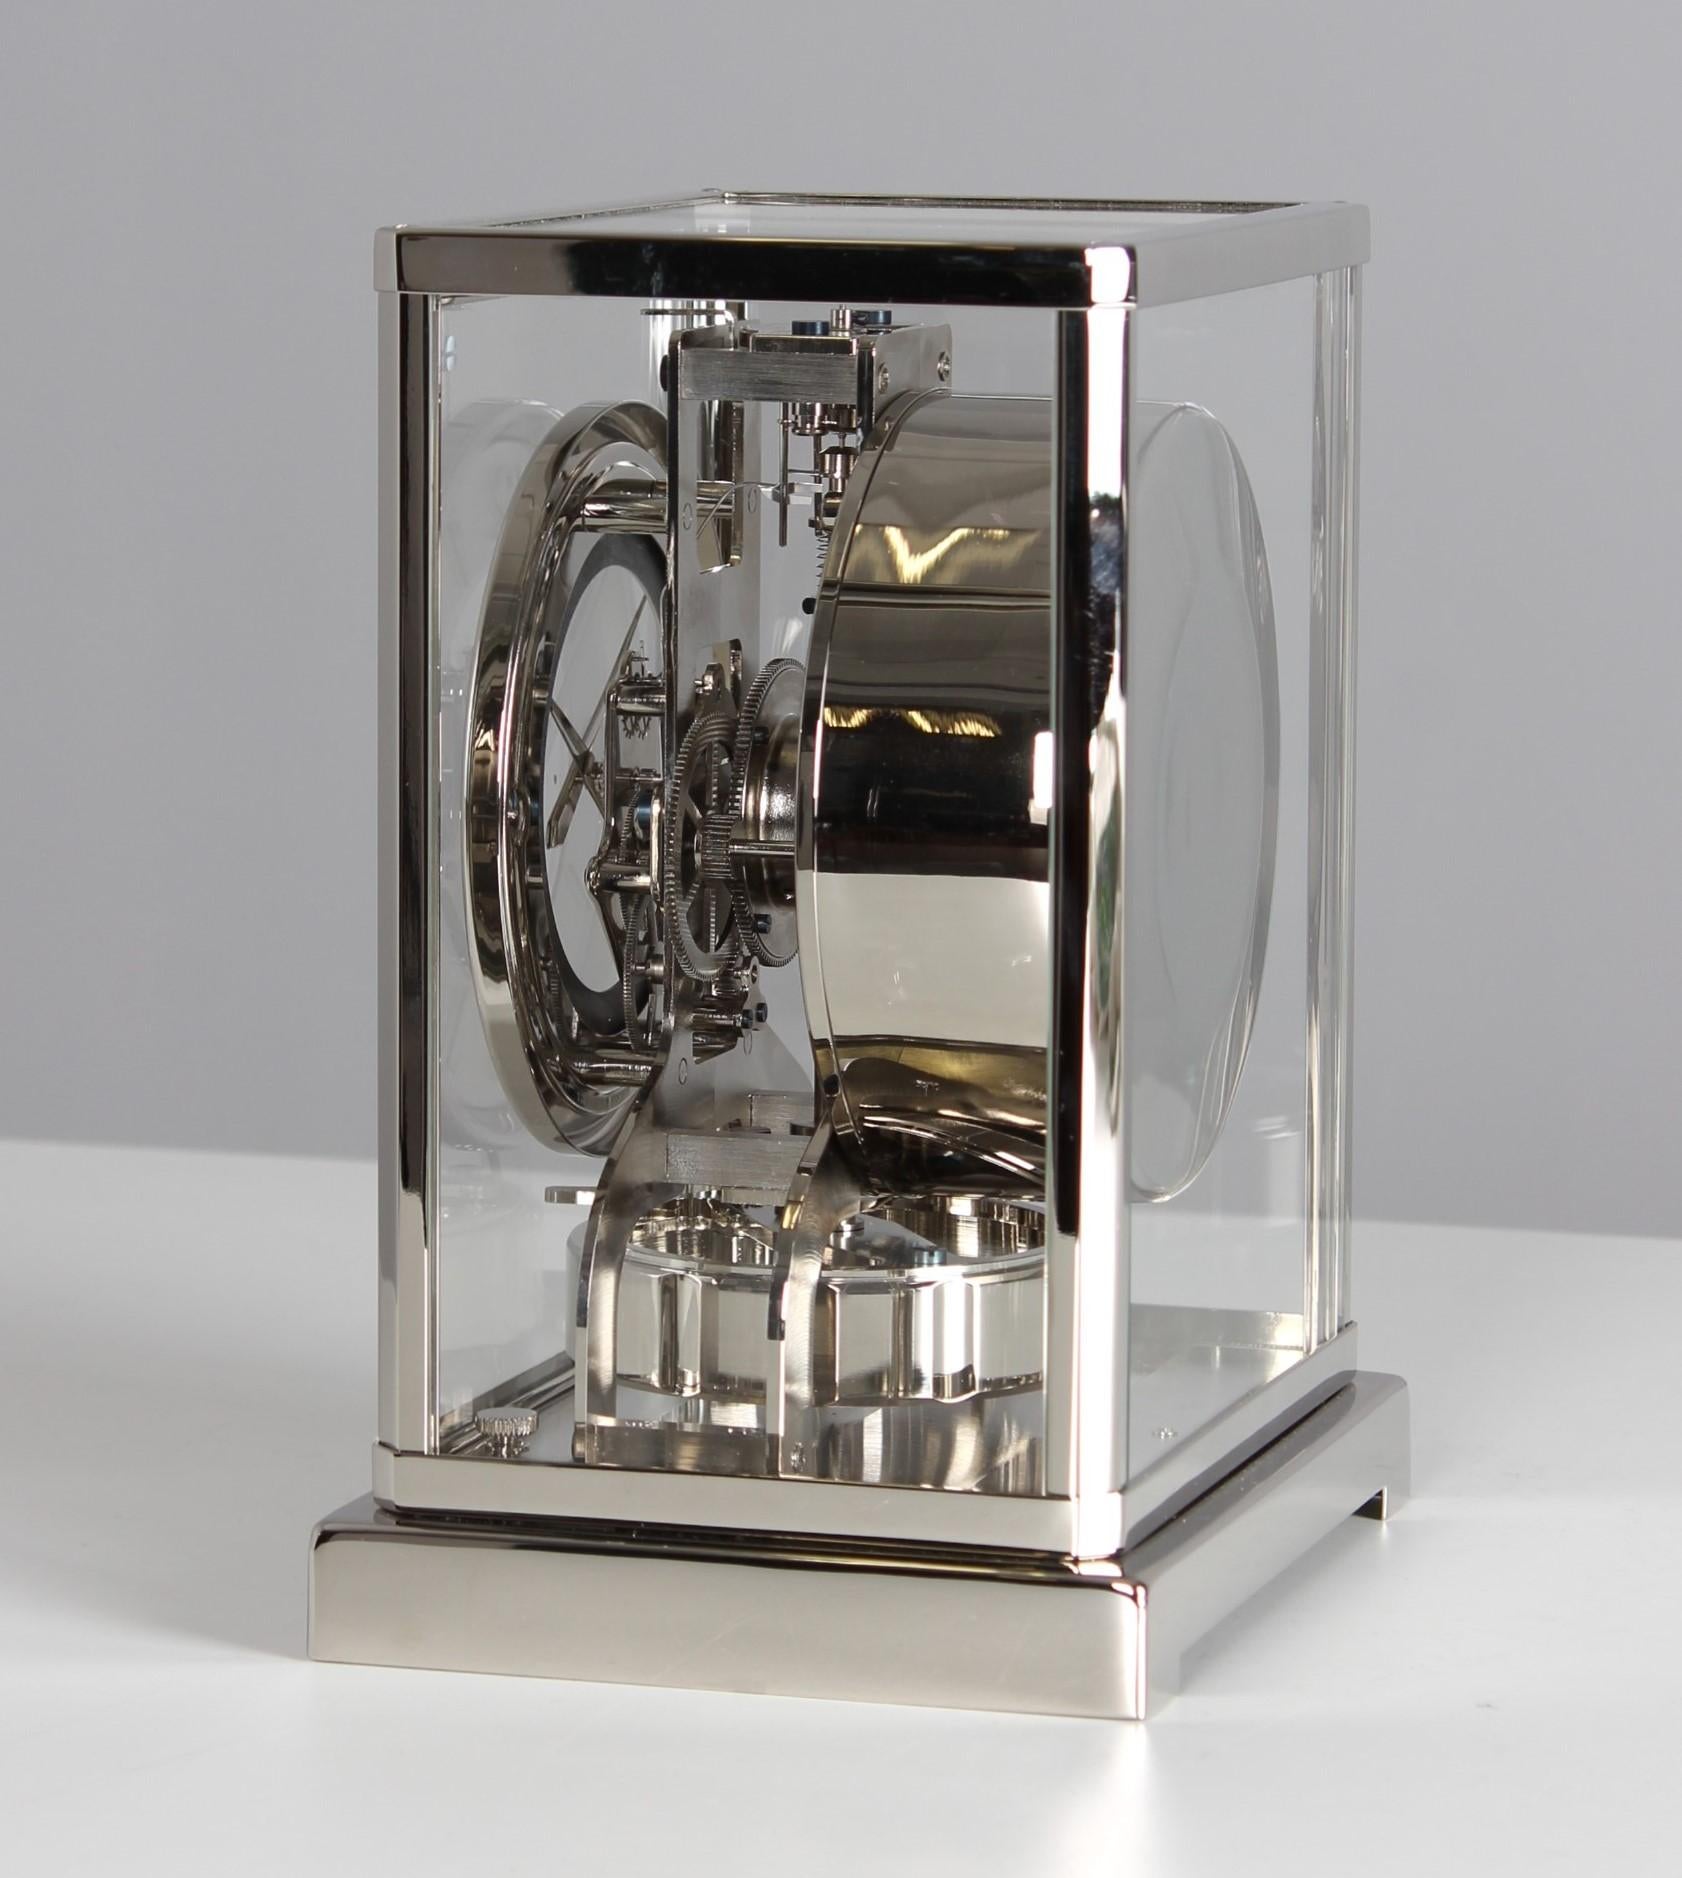 Jaeger LeCoultre, Silver Atmos Clock from 1955, Revised and New Nickel-Plated 2